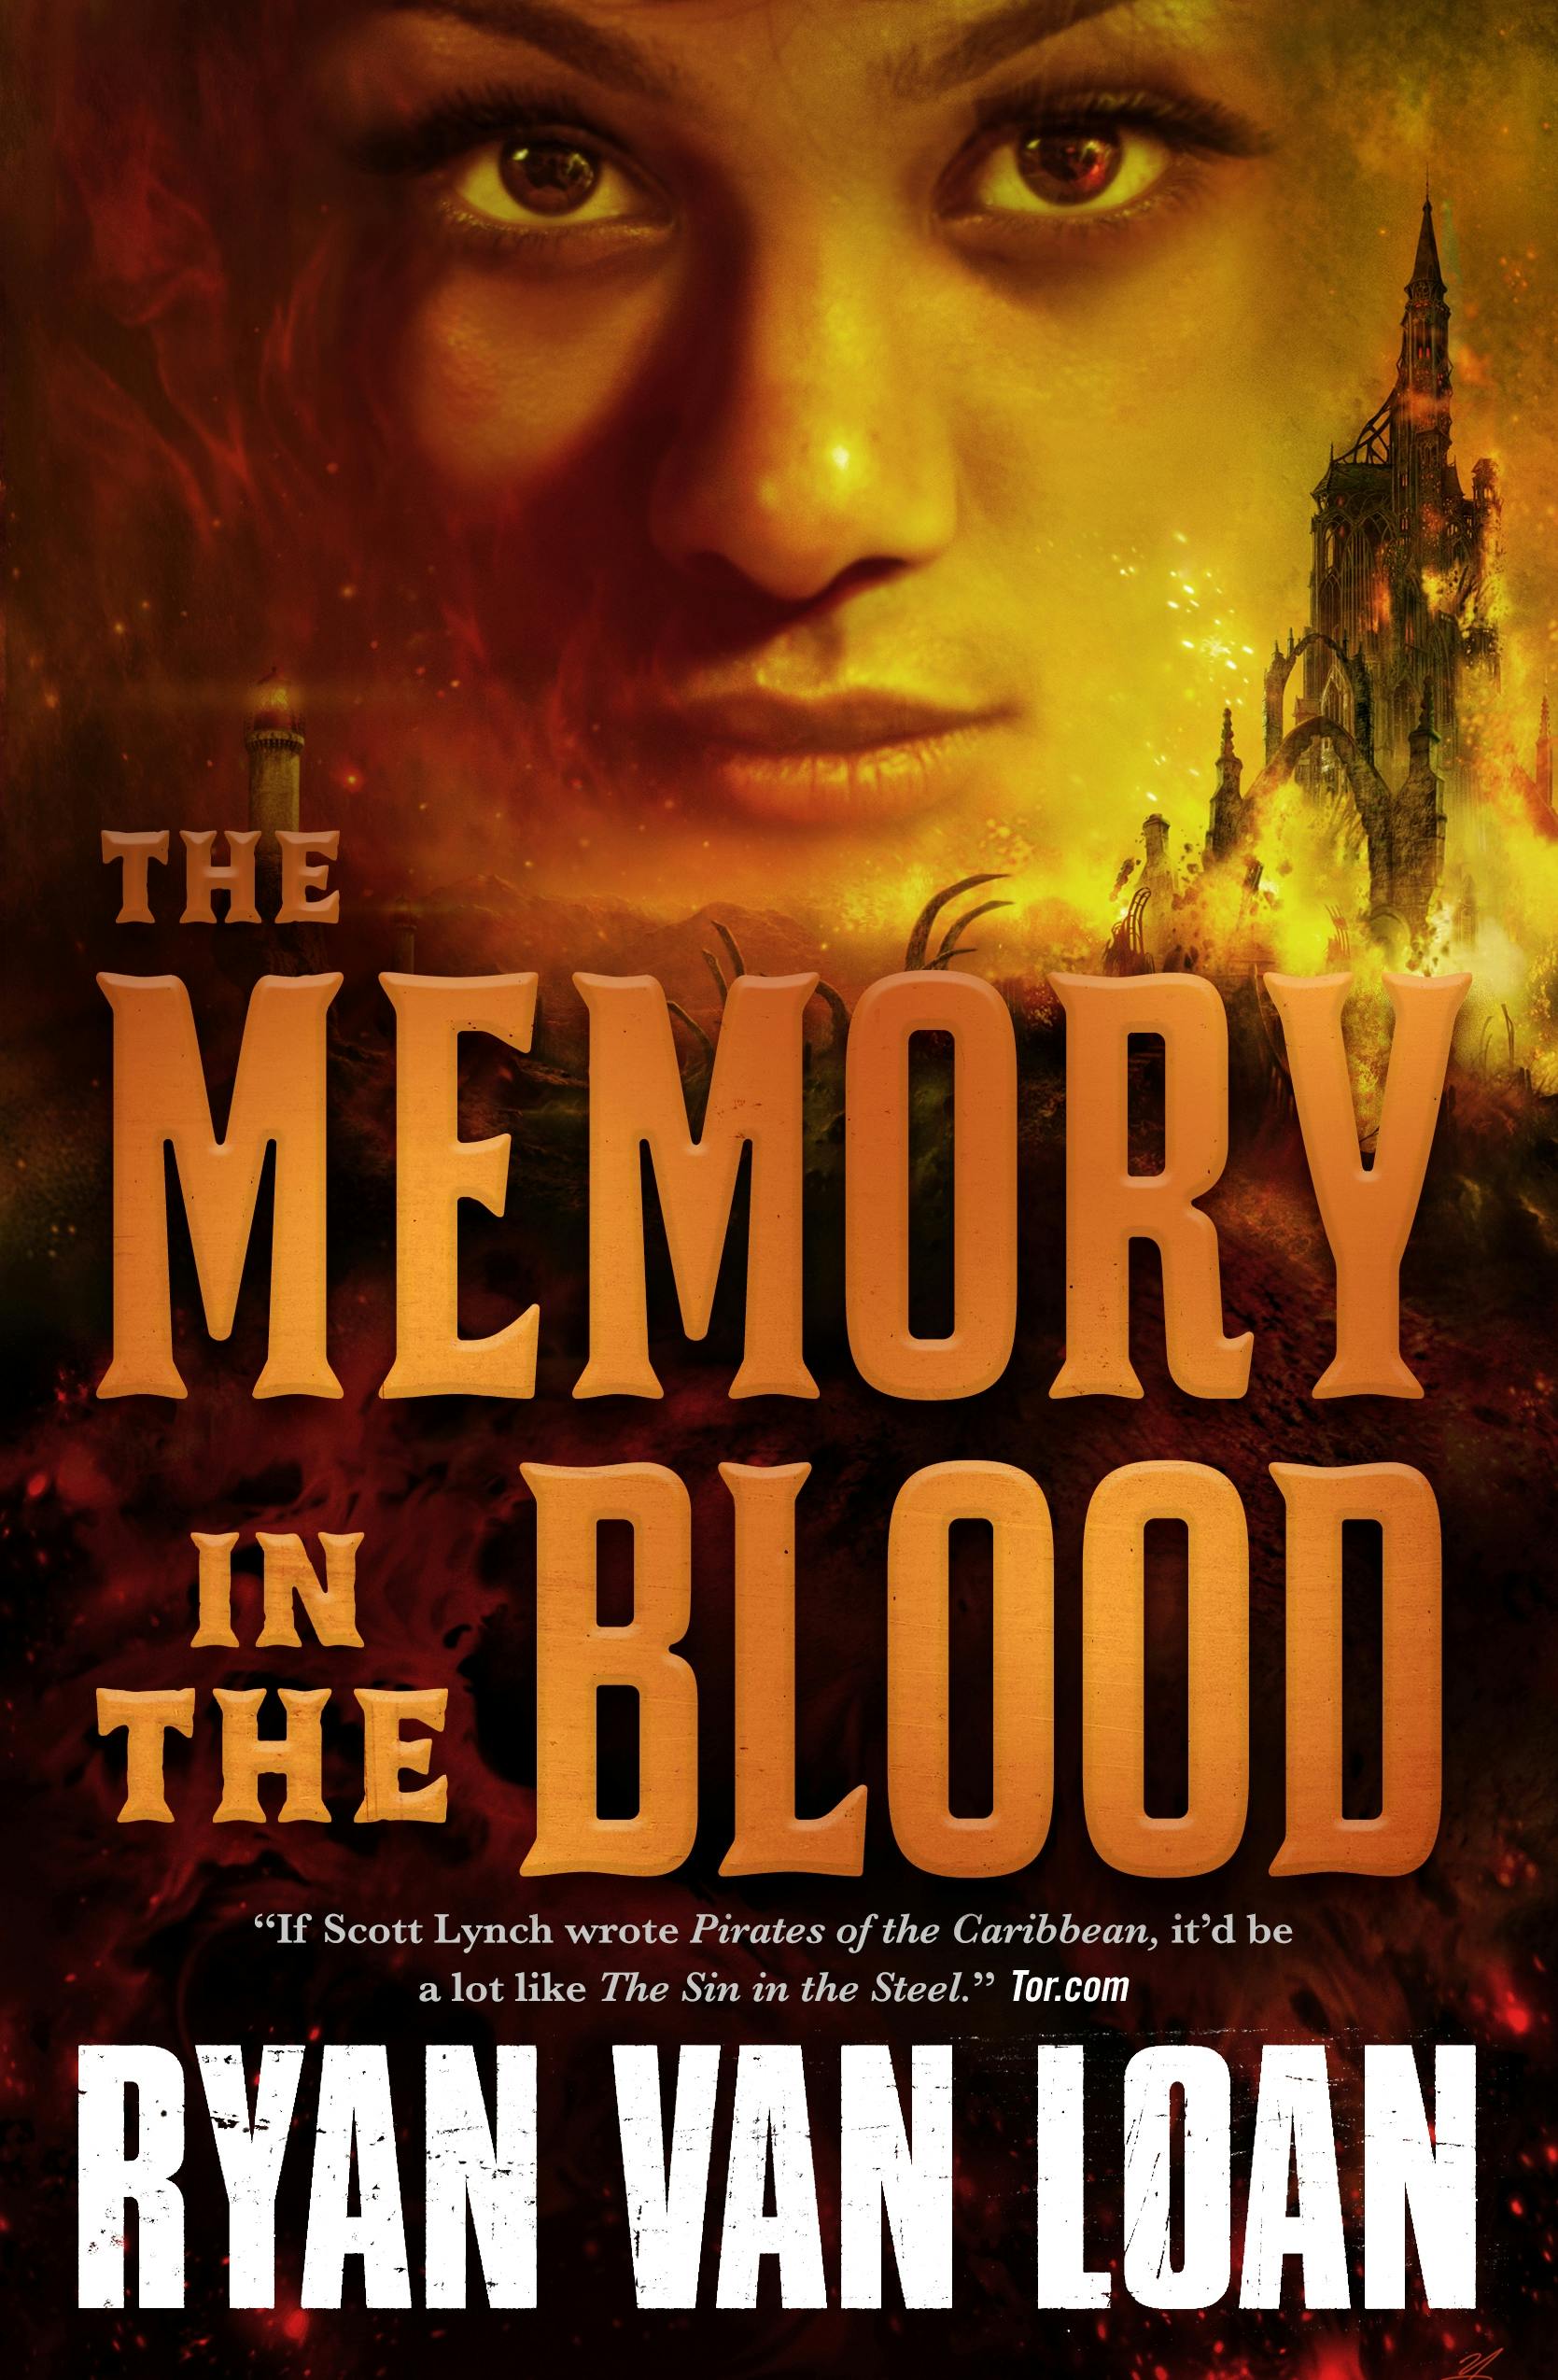 Cover for the book titled as: The Memory in the Blood